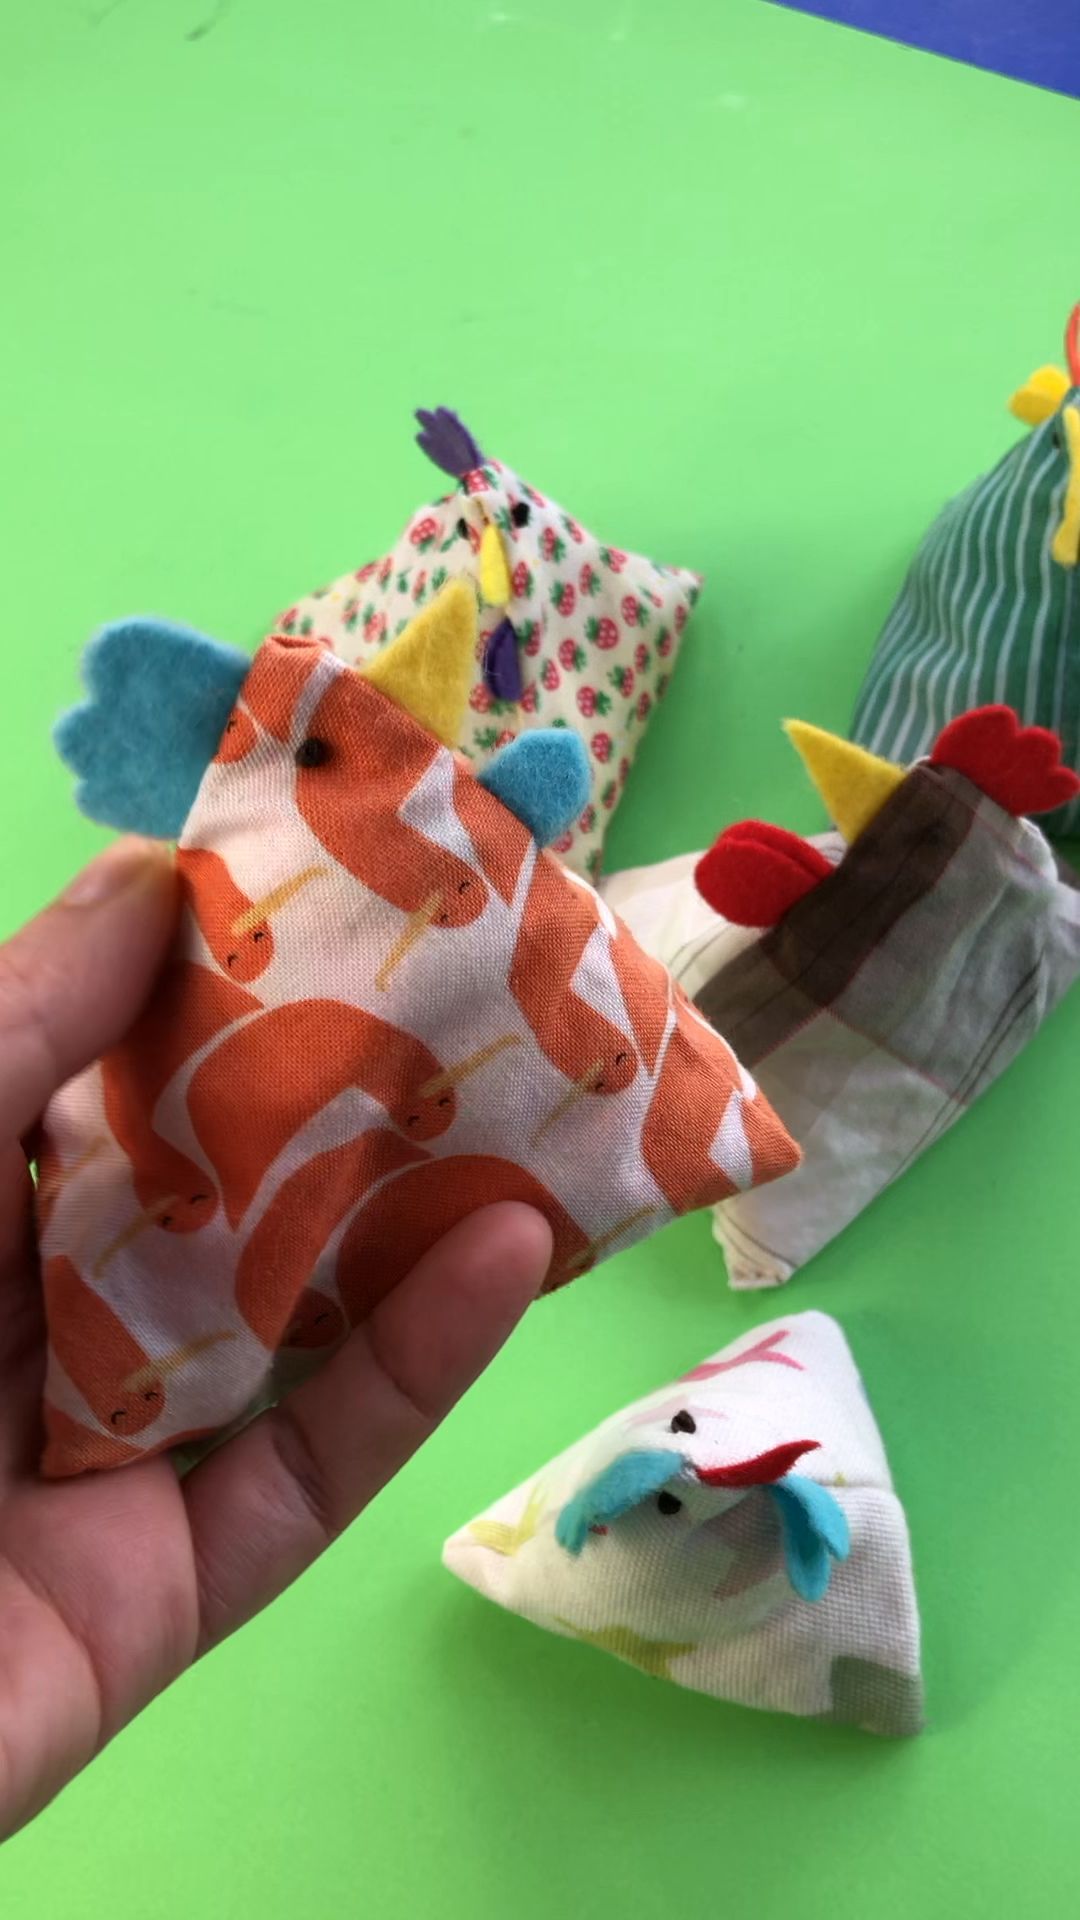 18 fabric crafts For Kids to make ideas